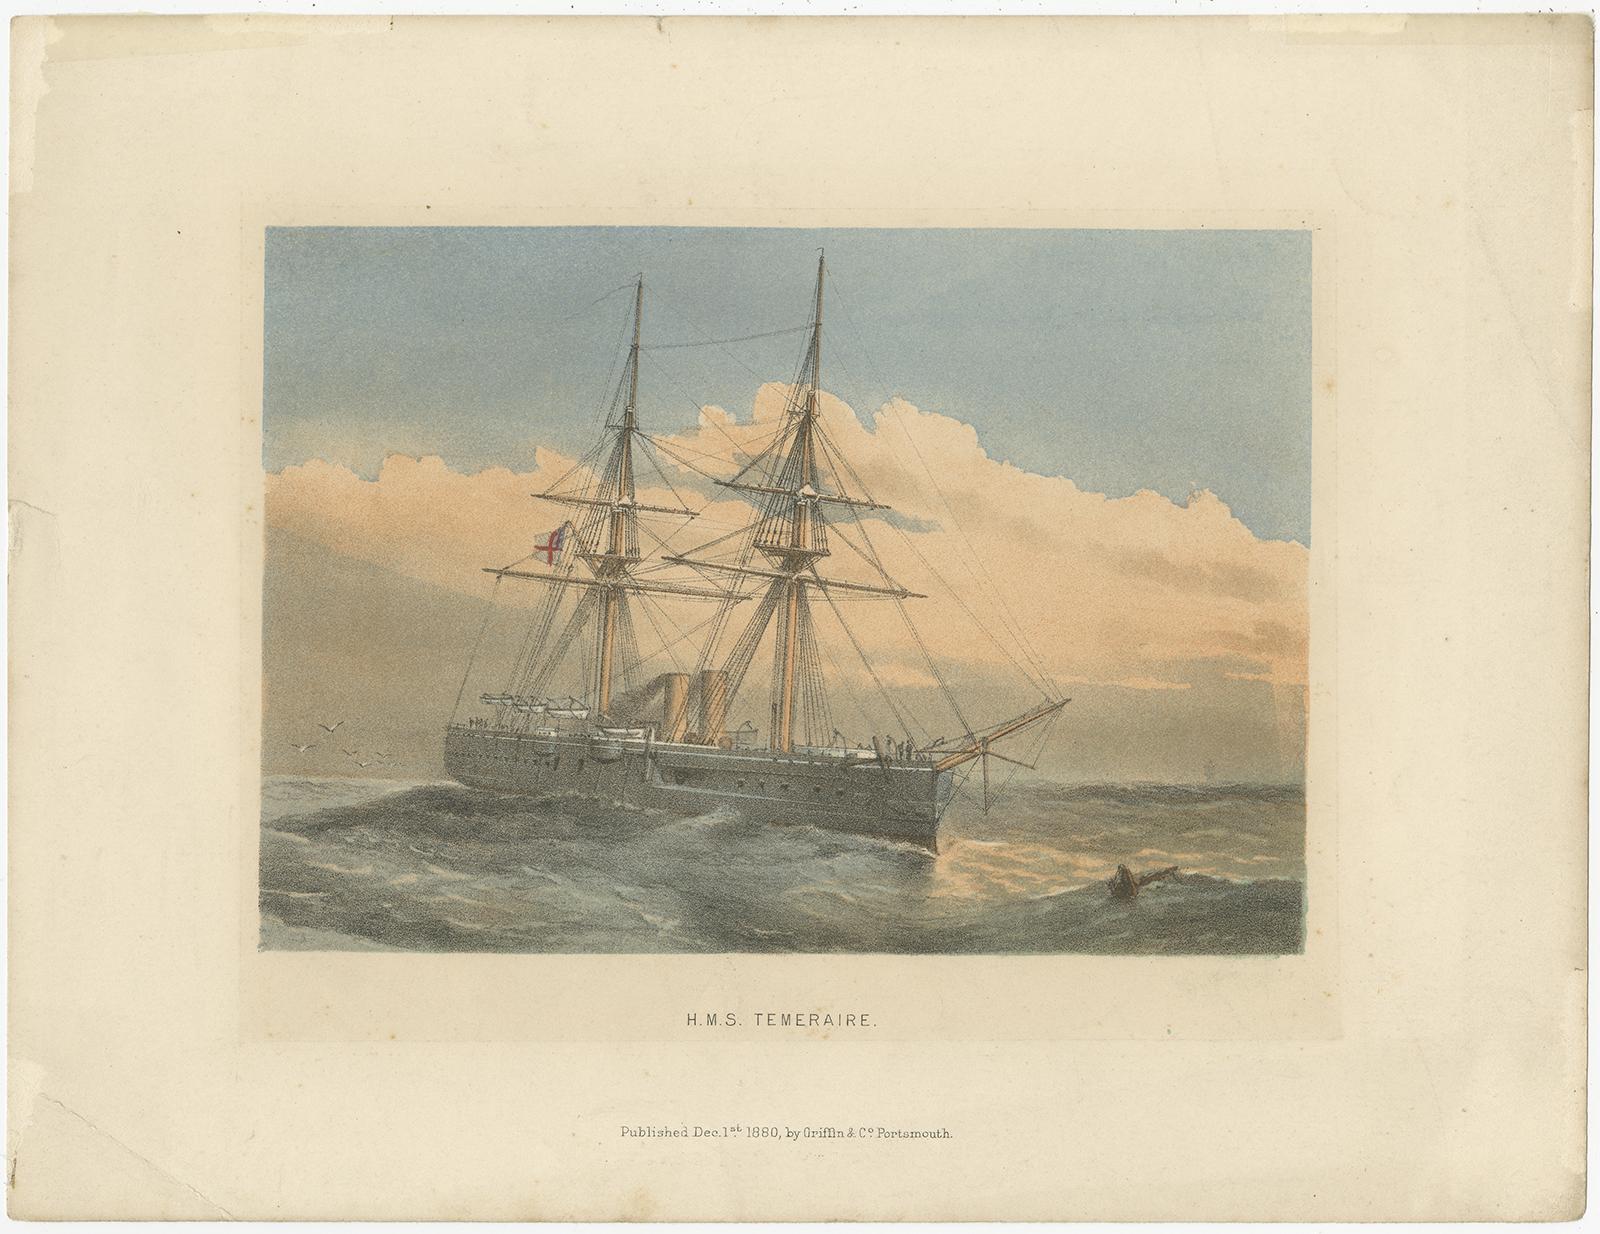 Set of two antique prints of HMS ships titled 'H.M.S. Orontes' and 'H.M.S. Temeraire'. Published by Griffin & Co, 1880.